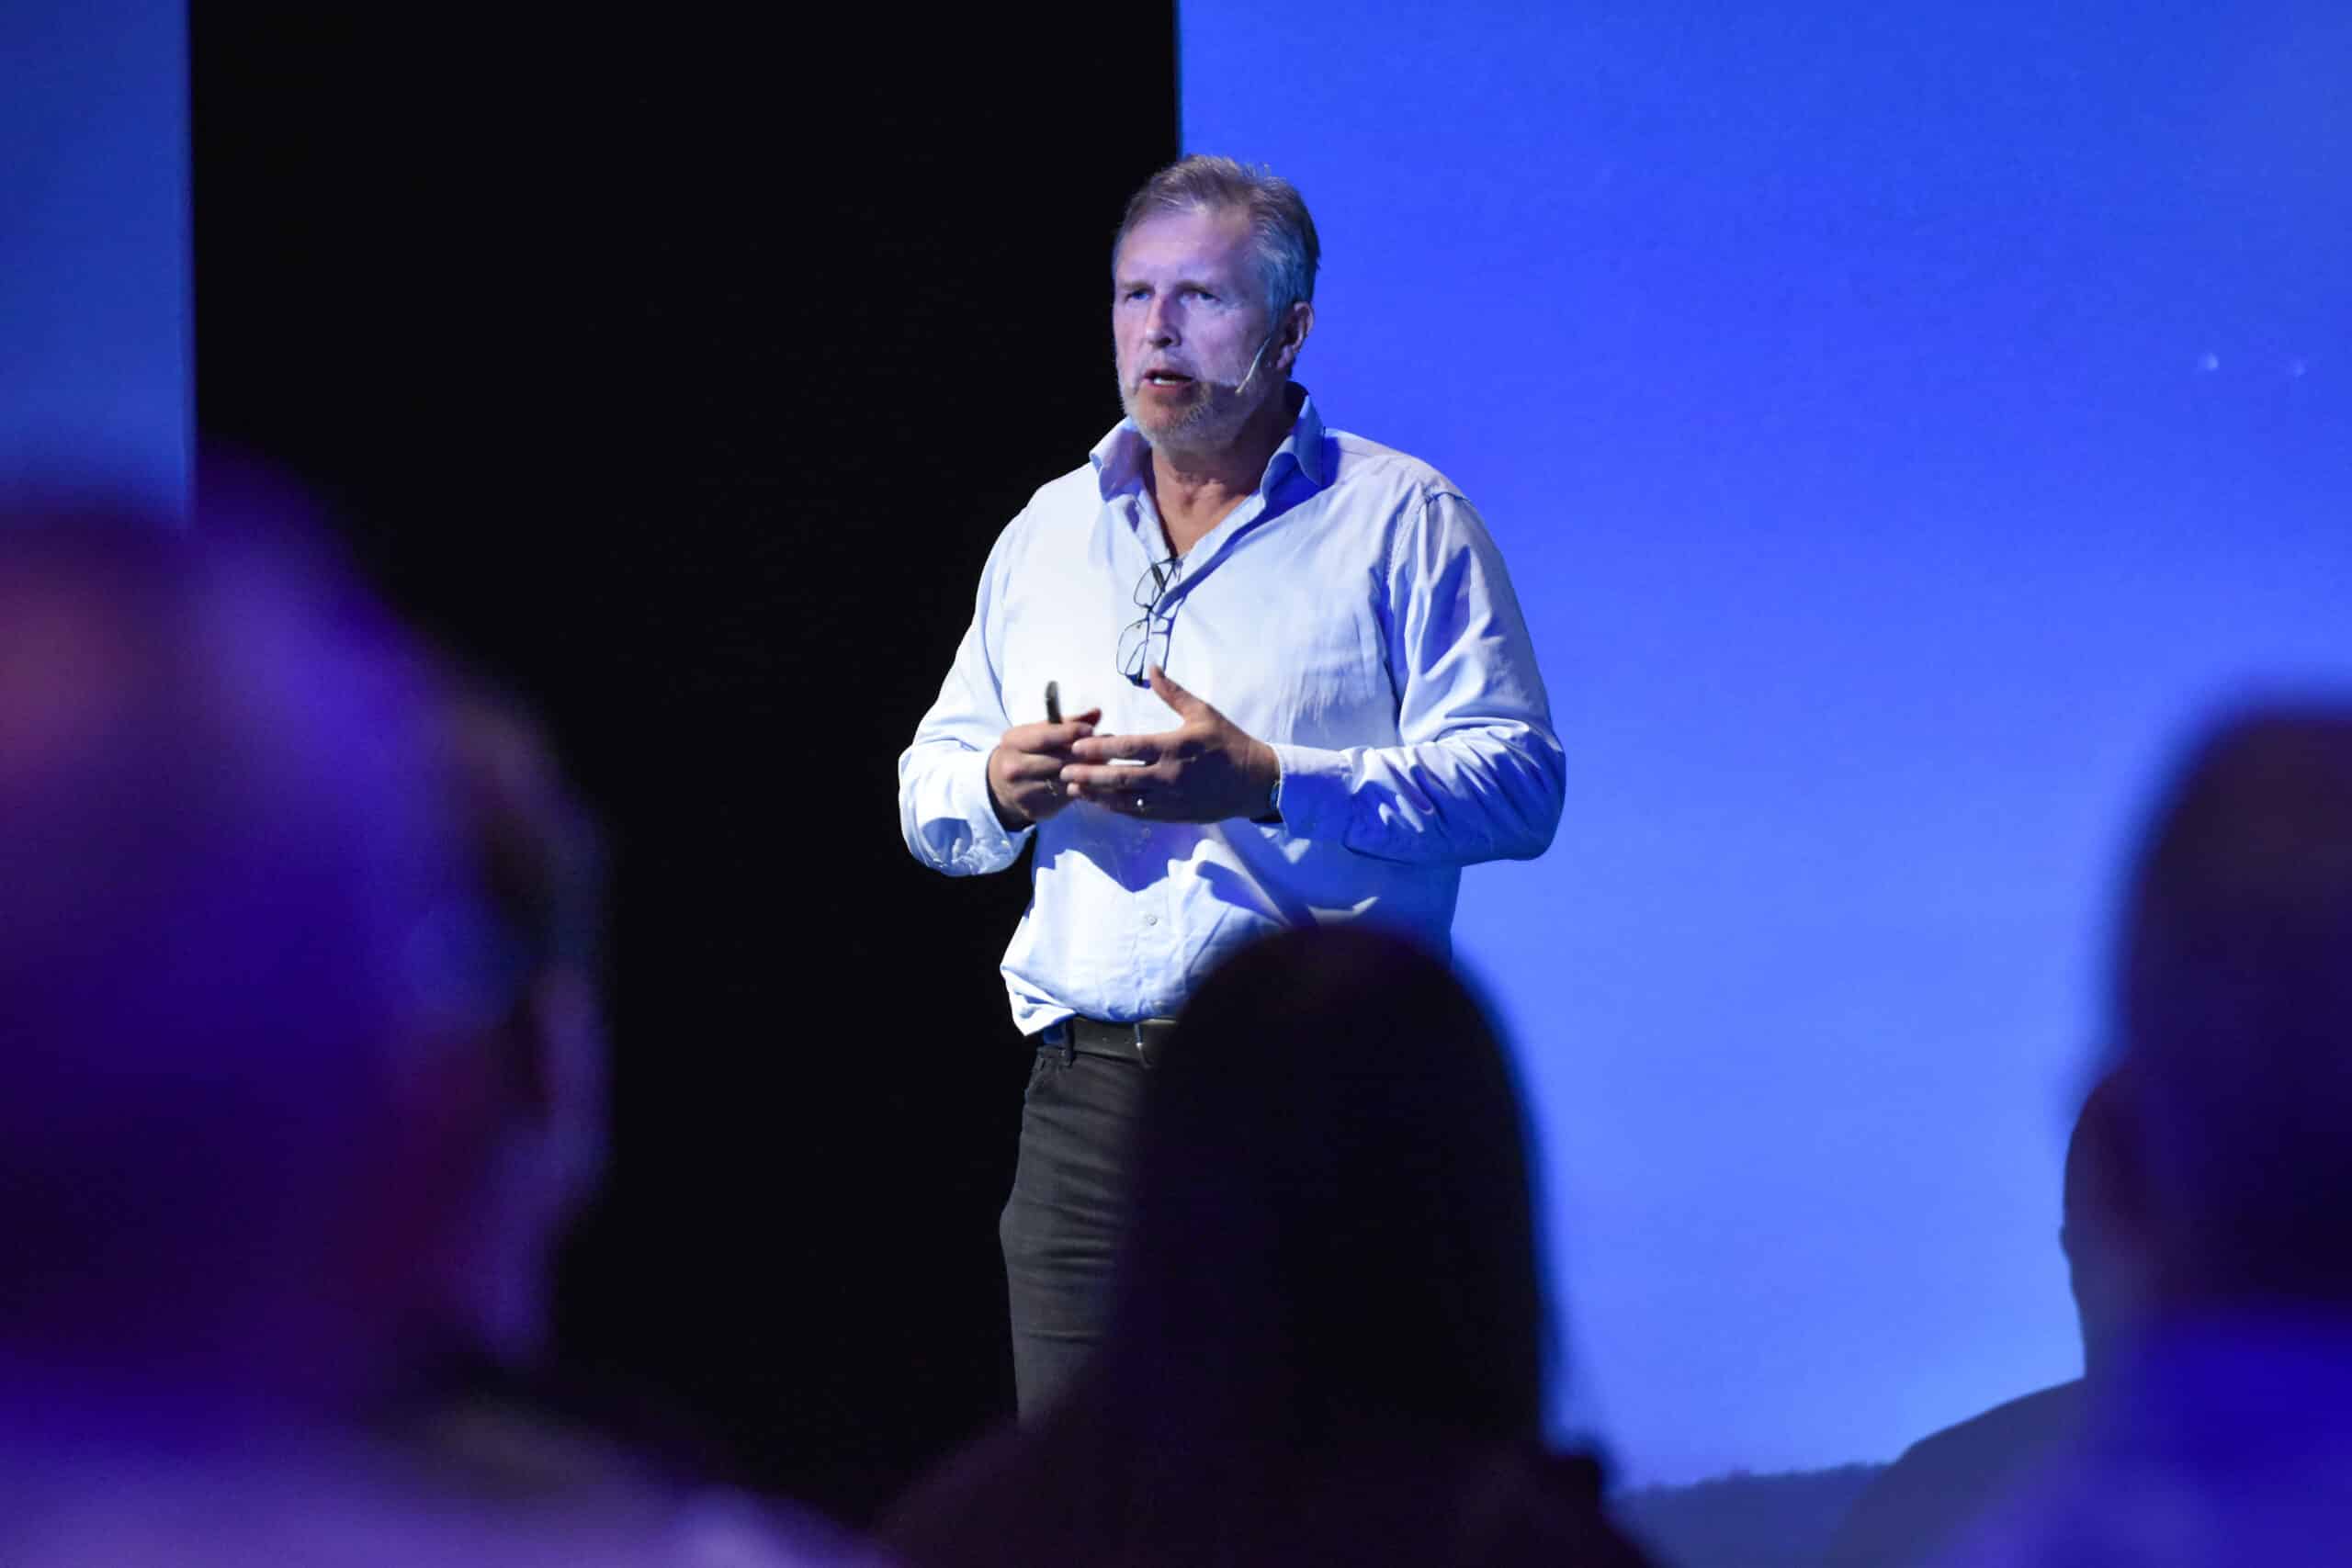 Knut Johansen on stage in the Smart Innovation Arena during the energy seminar on June 1, 2023.